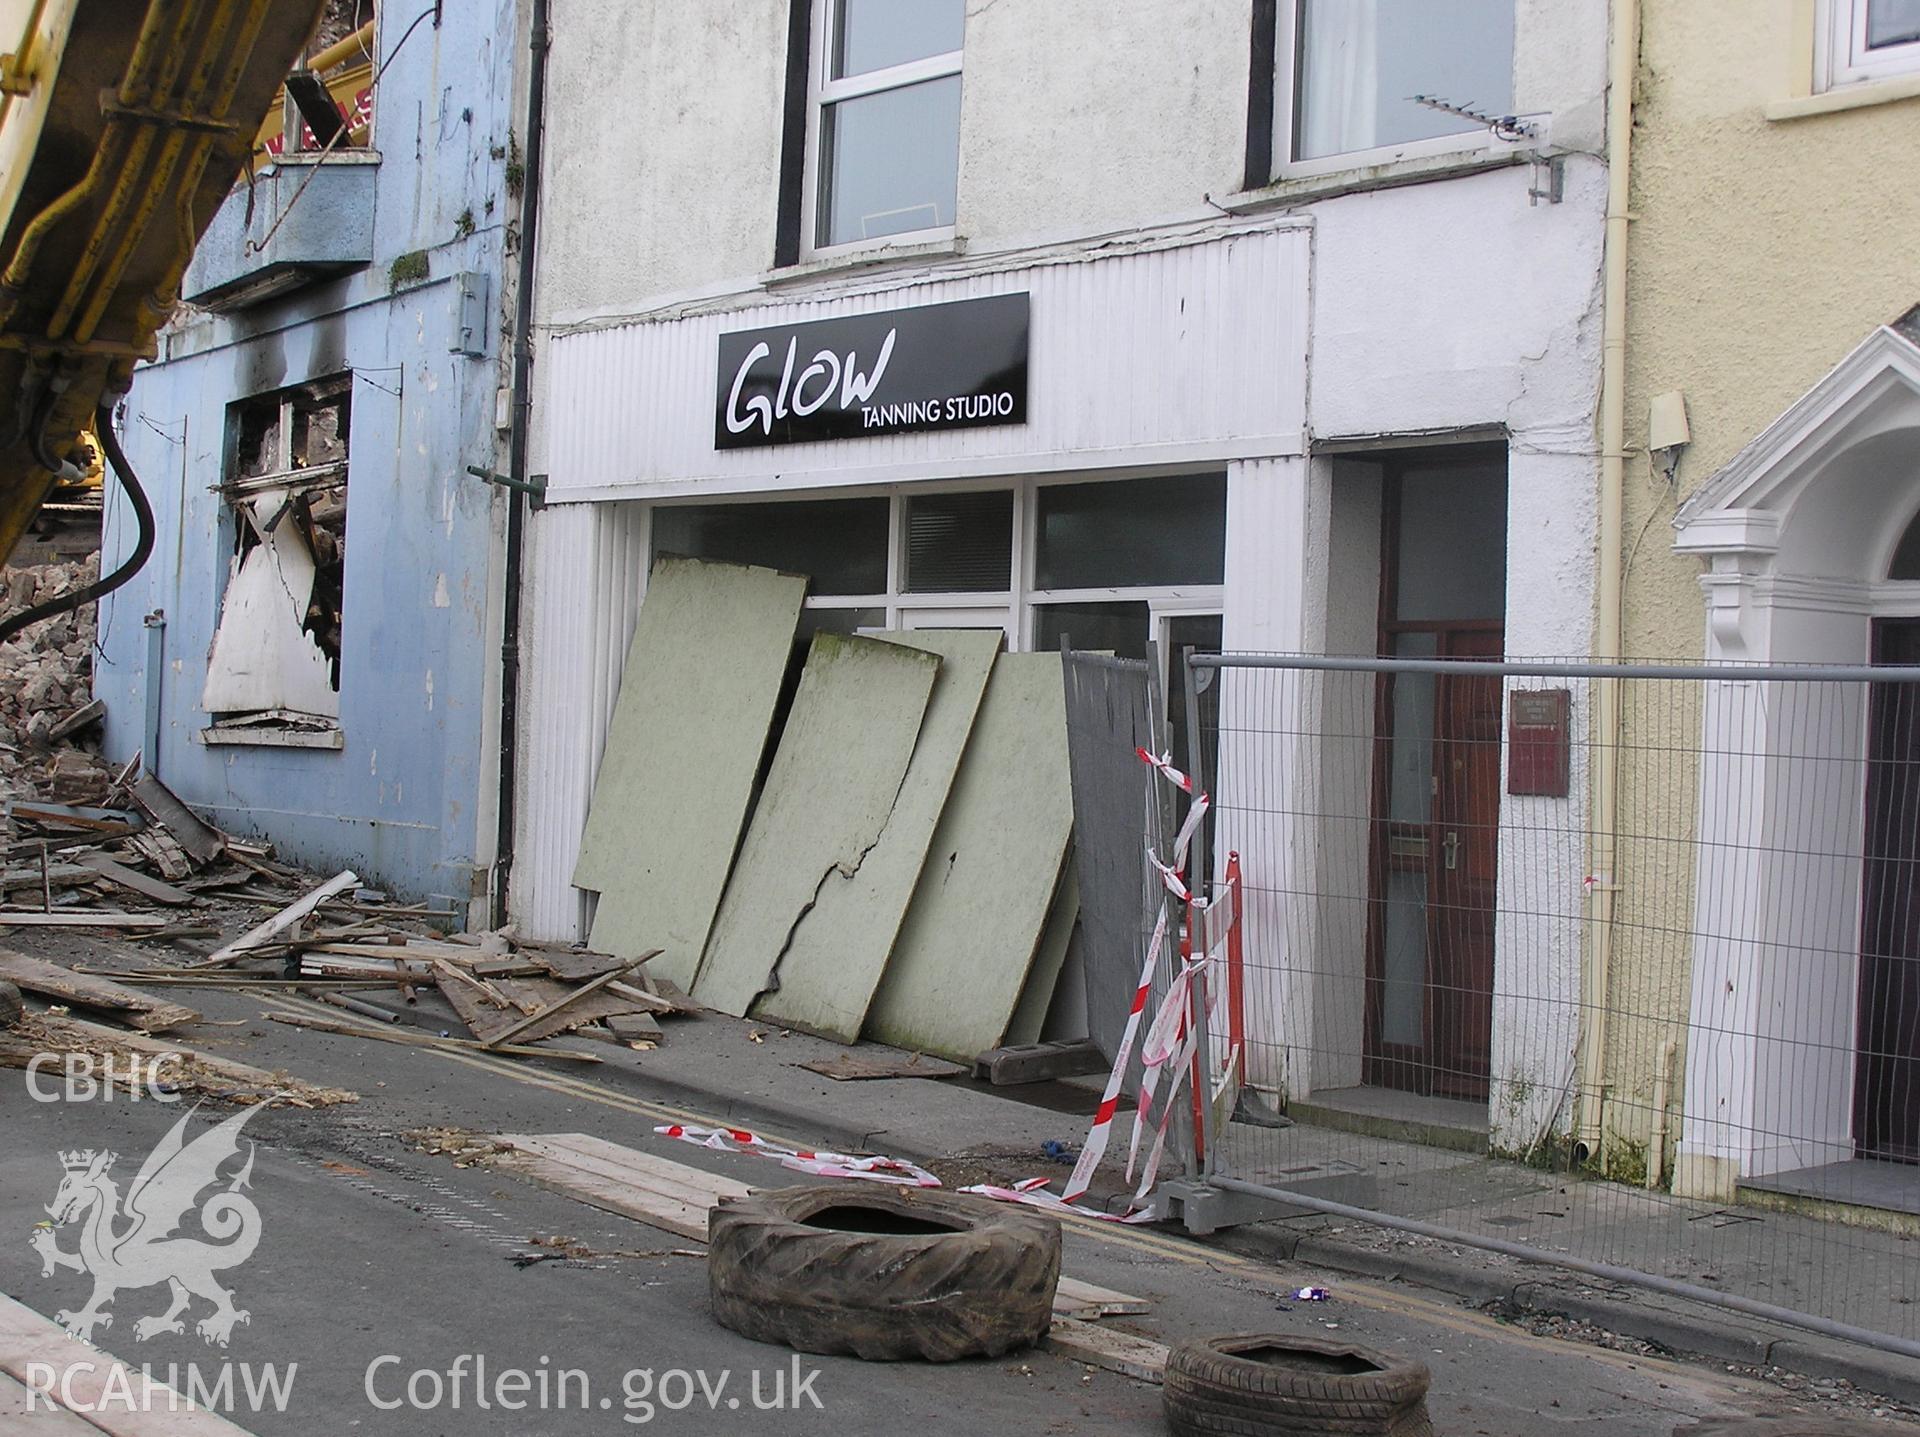 Colour digital photograph showing The Glow Tanning Studio in Tenby, close to the site of the Royal Gatehouse Hotel.